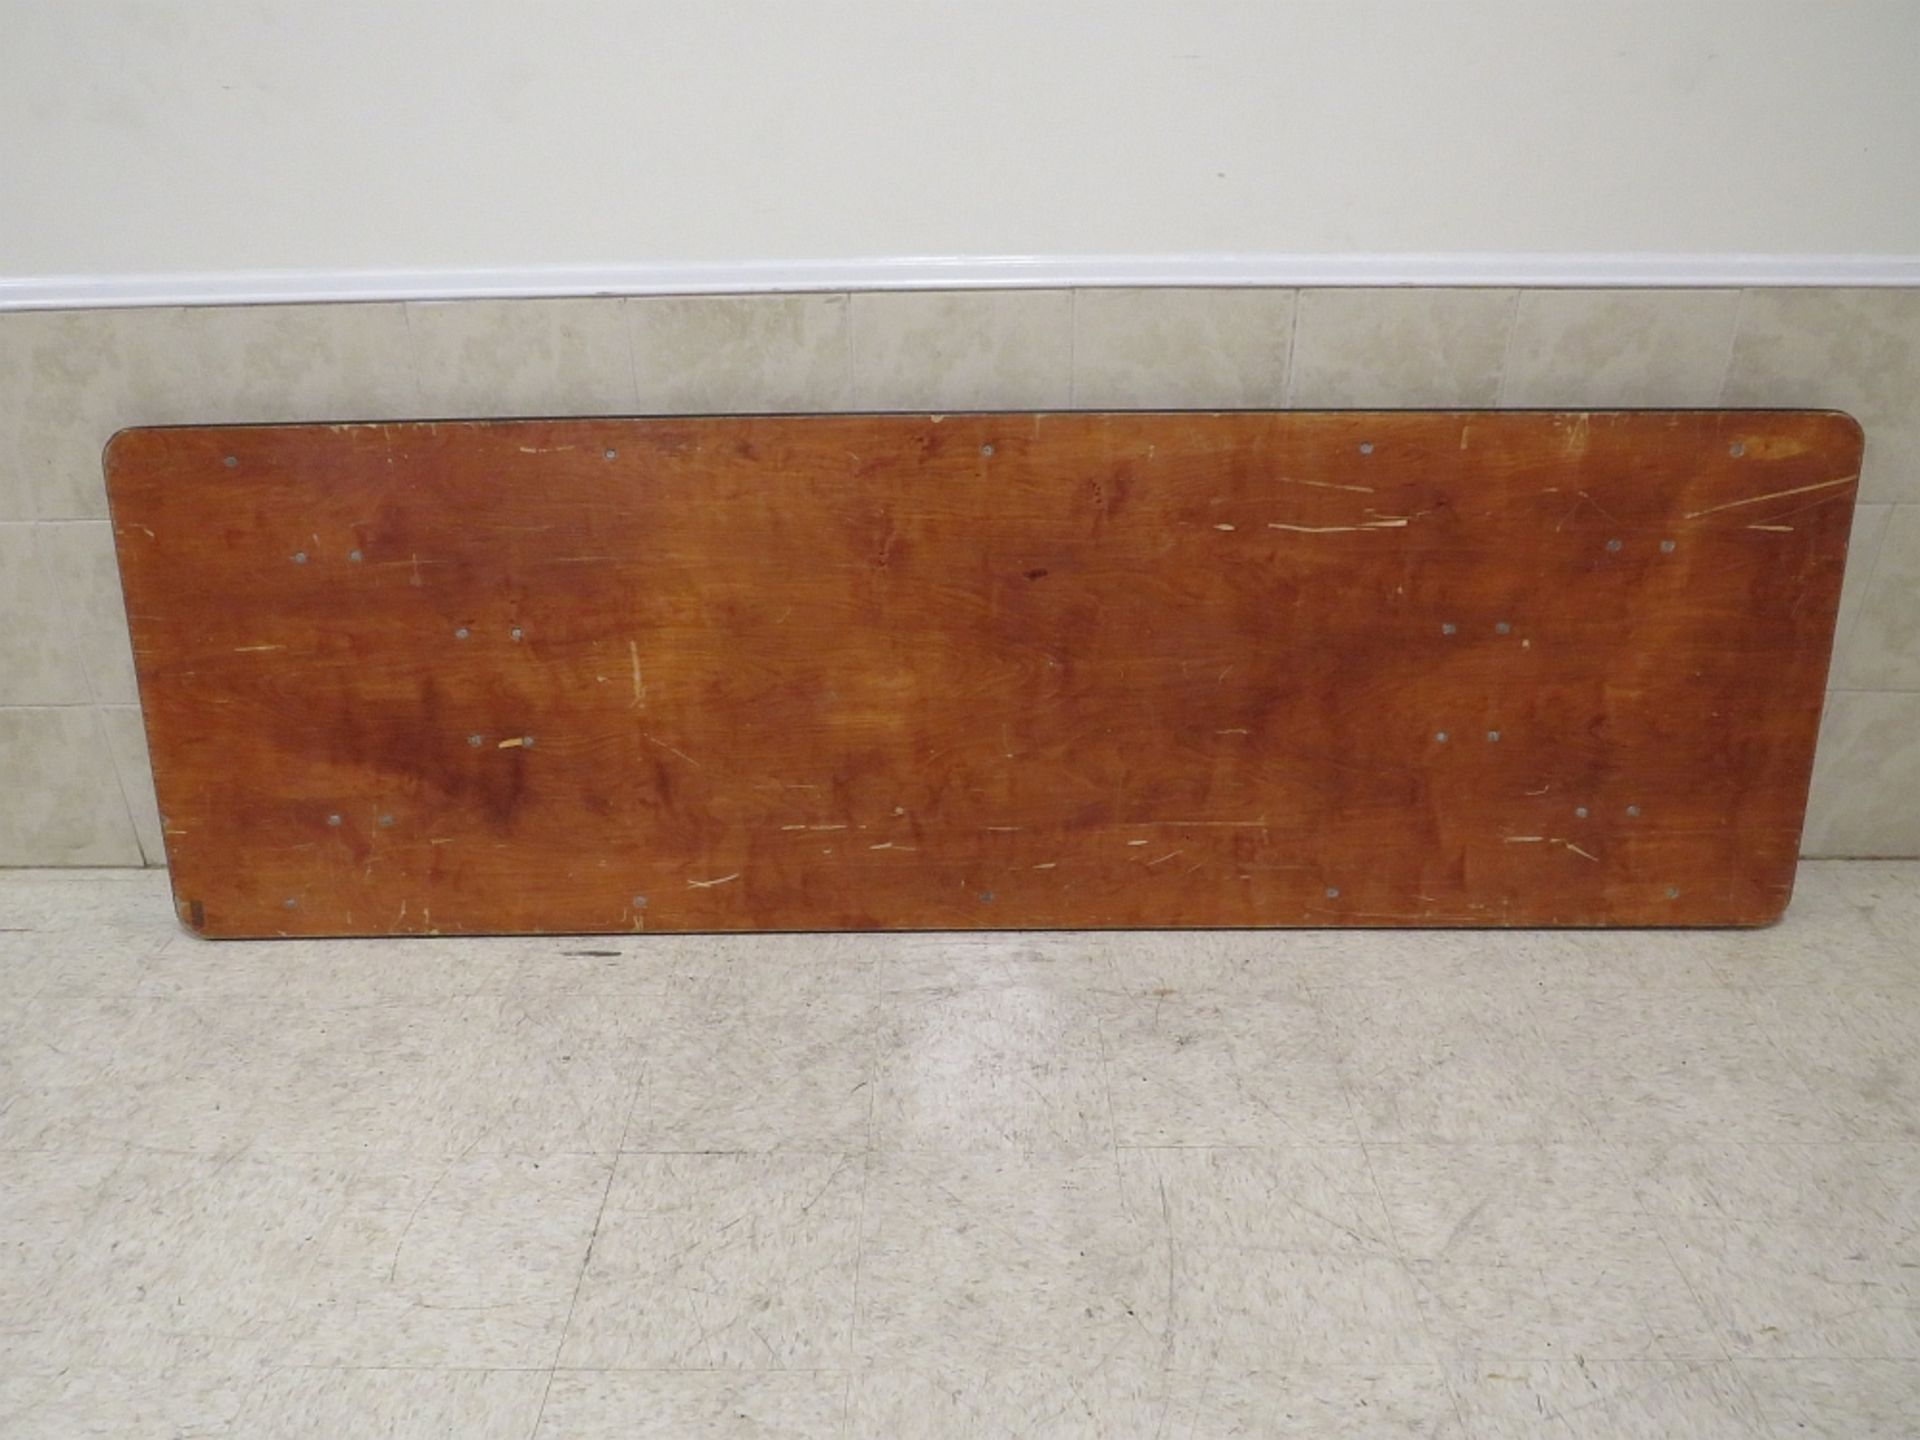 Table Rect - 8 ft x 30 in - Wood AB Stock